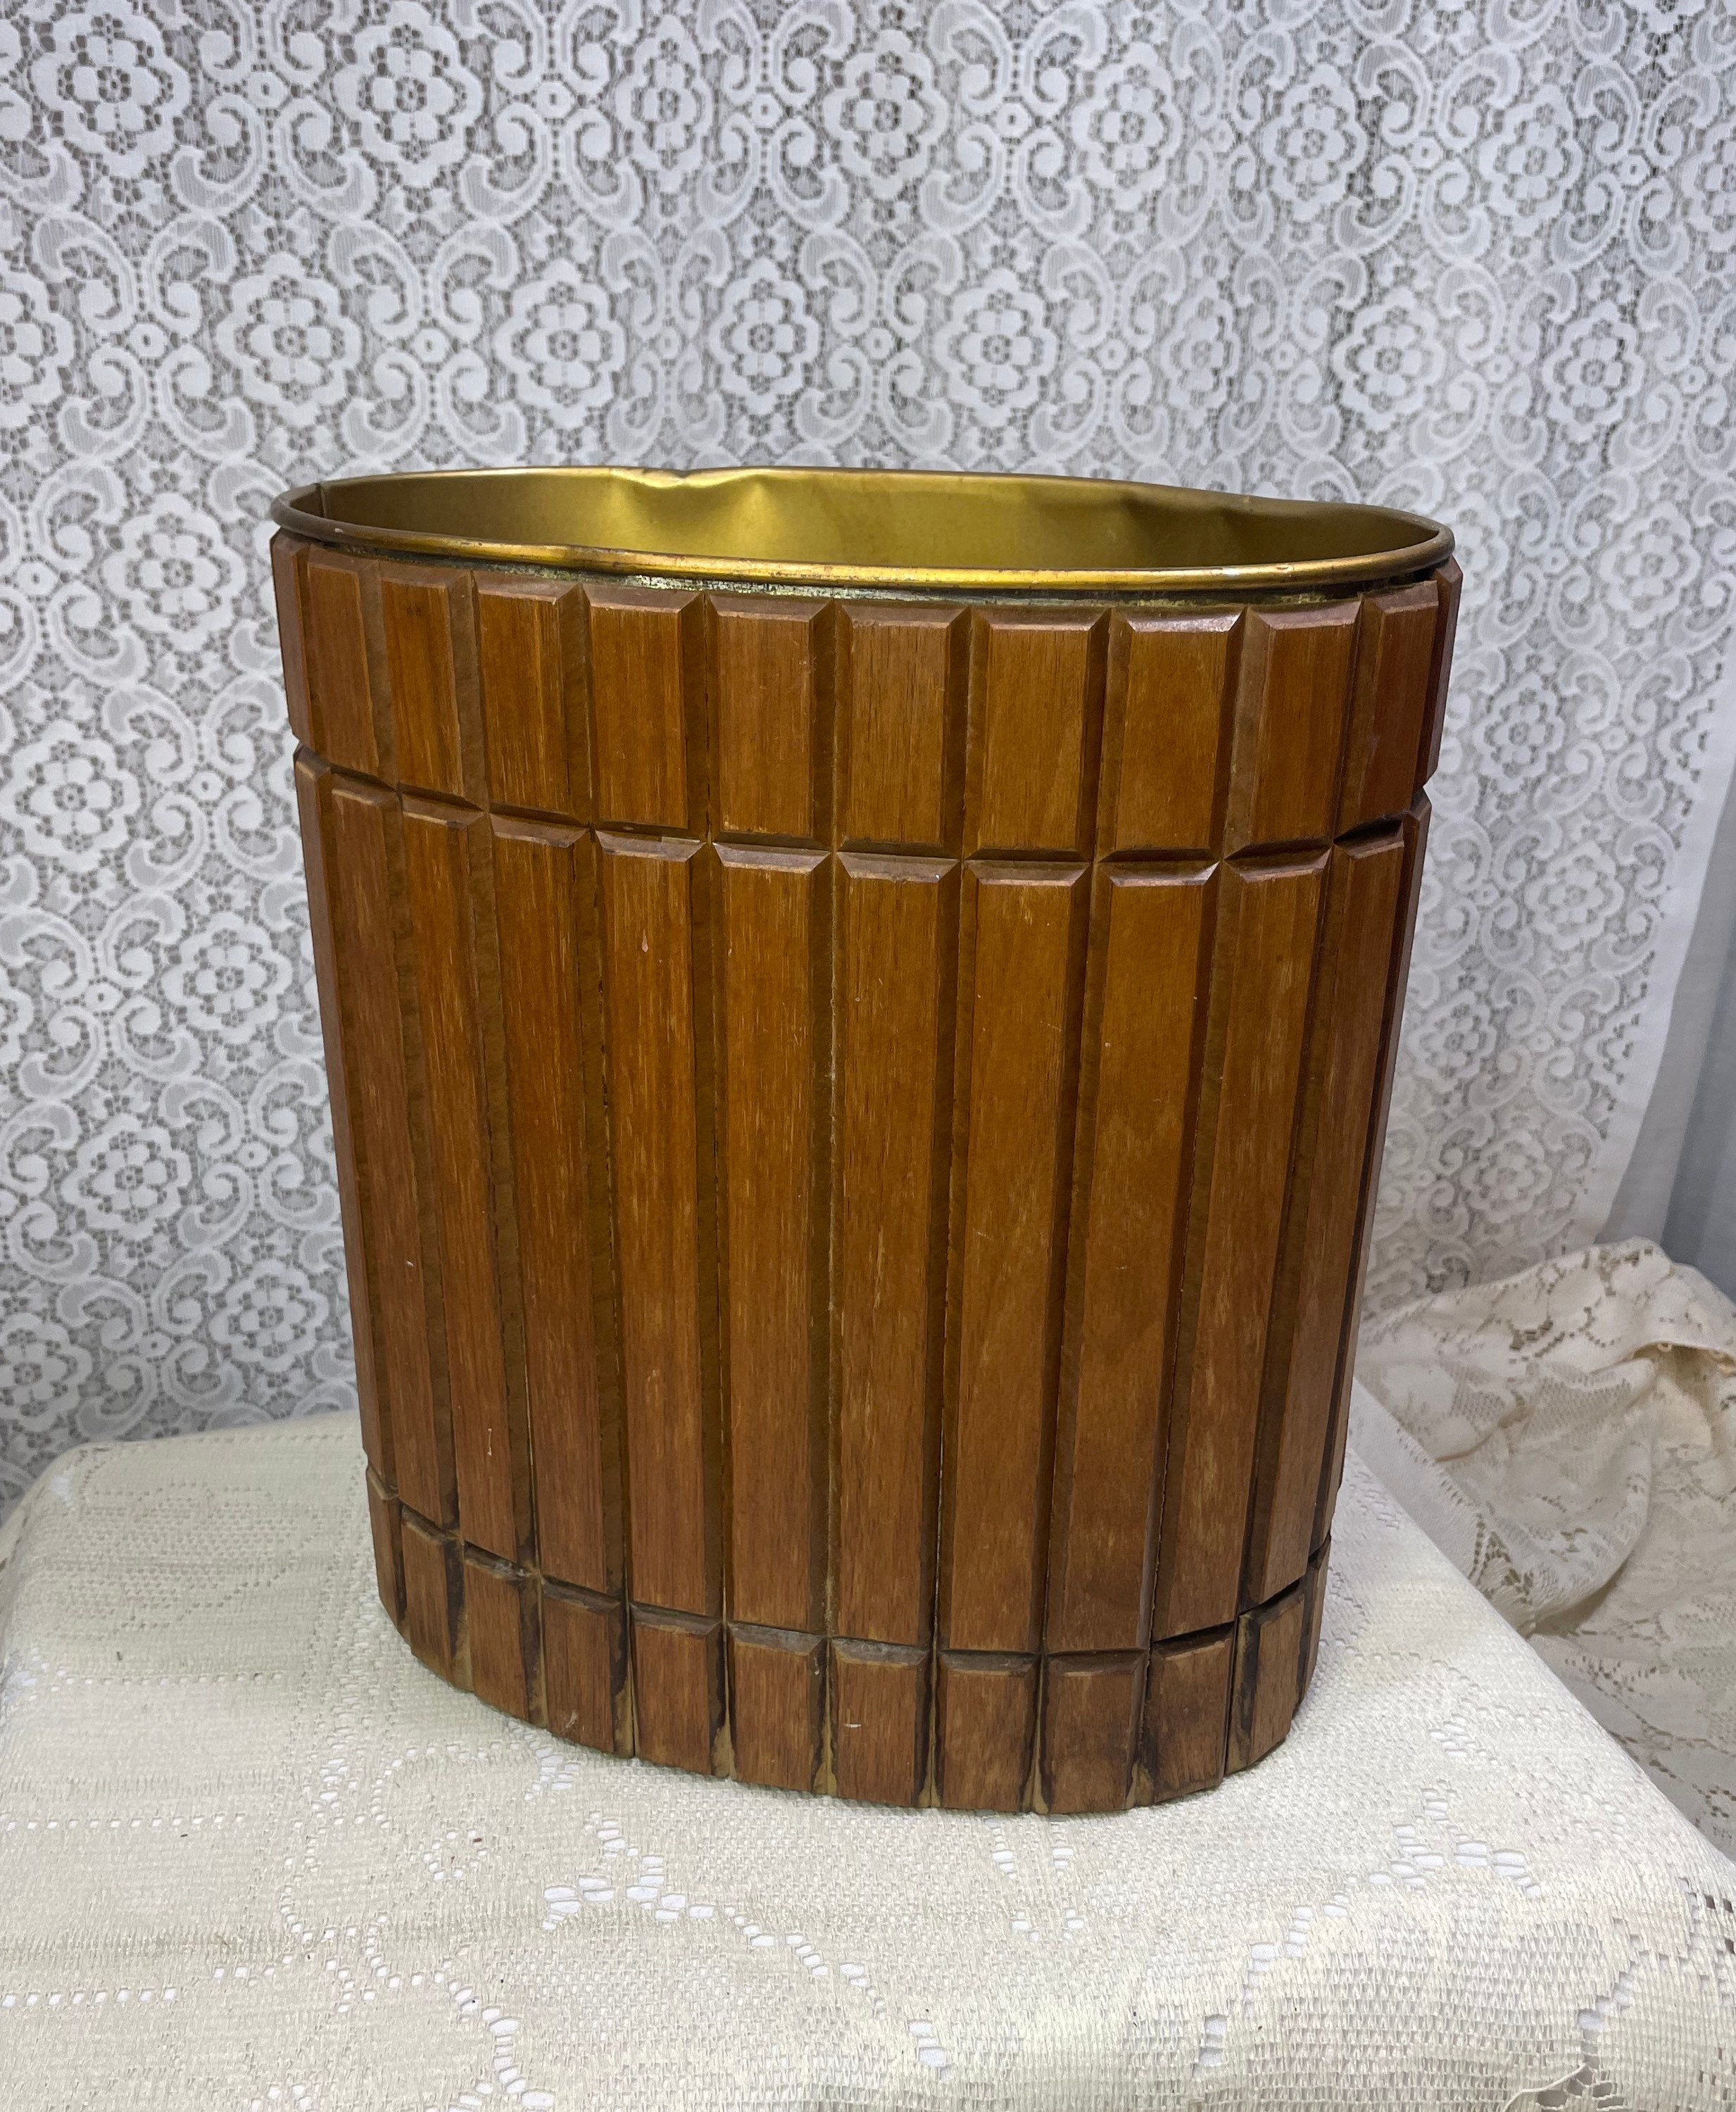 The Basket Lady Large Wicker Waste Basket with Metal Liner, One size, Antique Walnut Brown